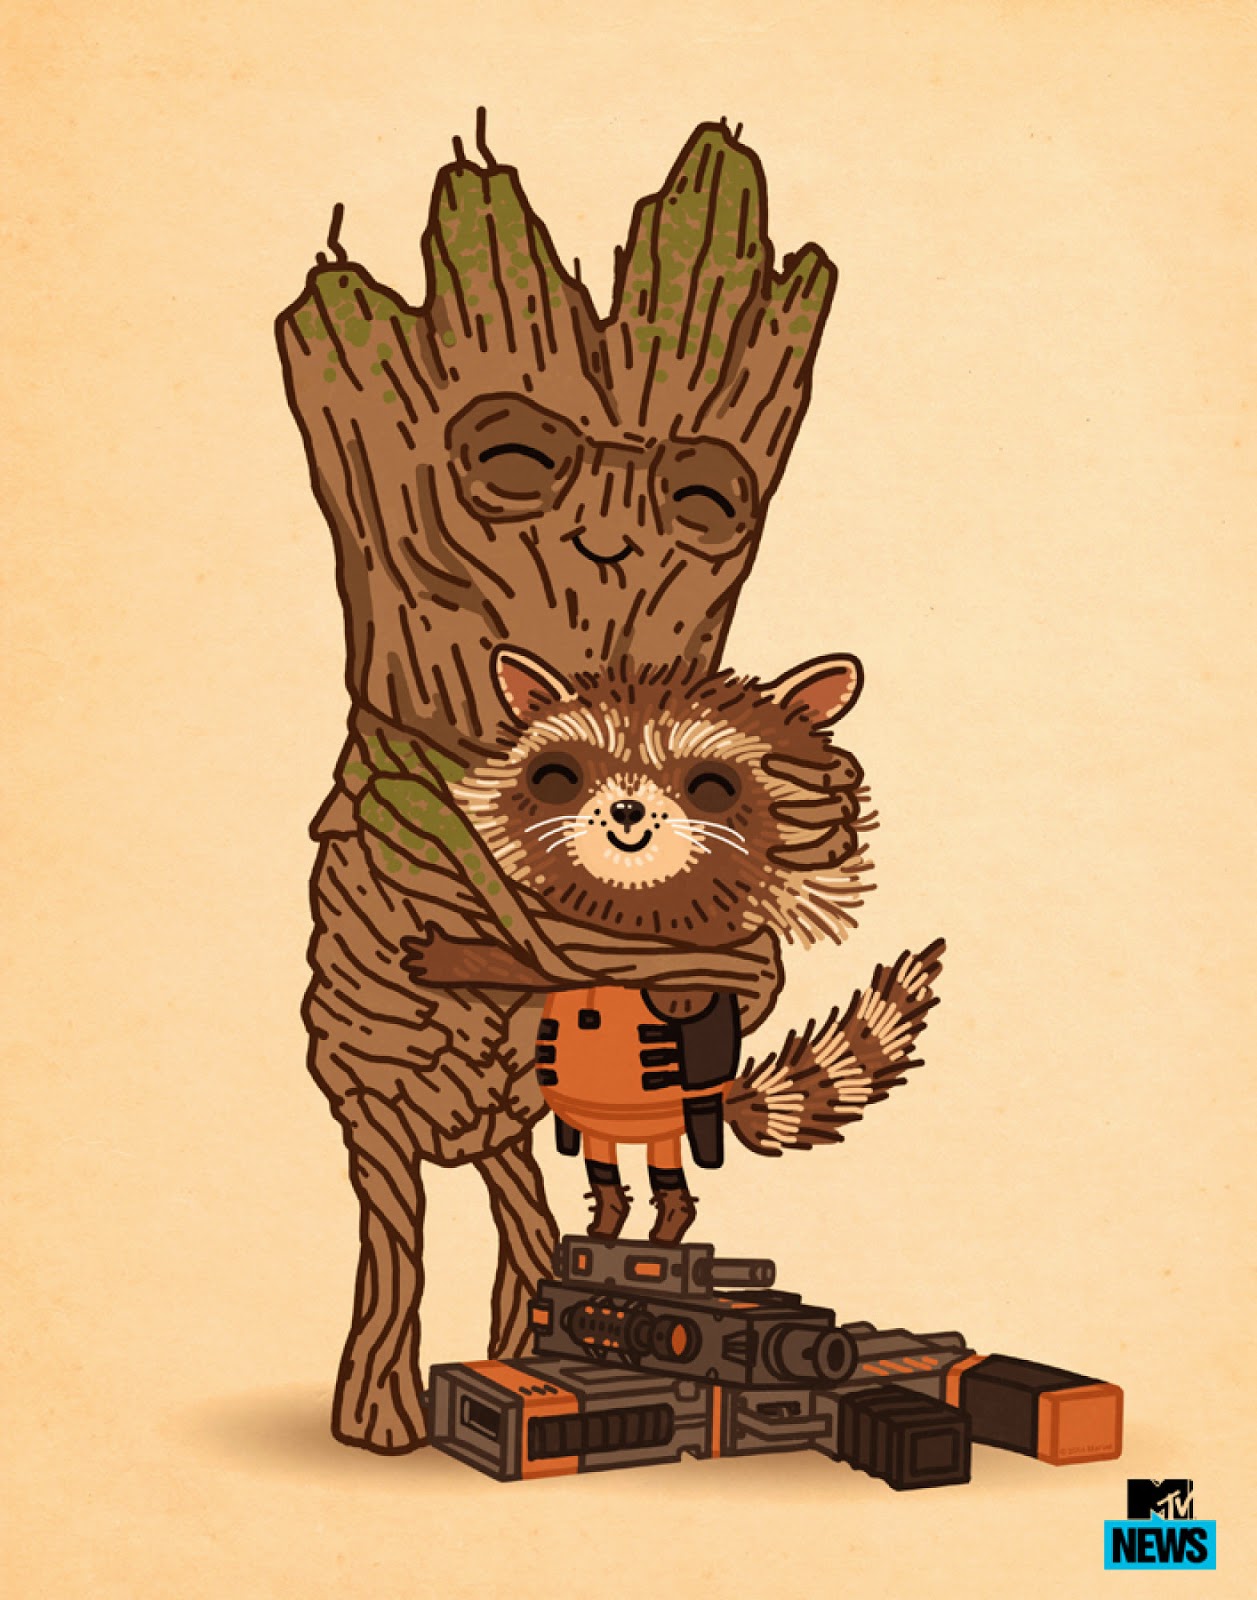 San+Diego+Comic-Con+2014+Exclusive+Guardians+of+the+Galaxy+Rocket+Raccoon+&+Groot+%E2%80%9CTree+Hugger%E2%80%9D+Print+by+Mike+Mitchell.jpg